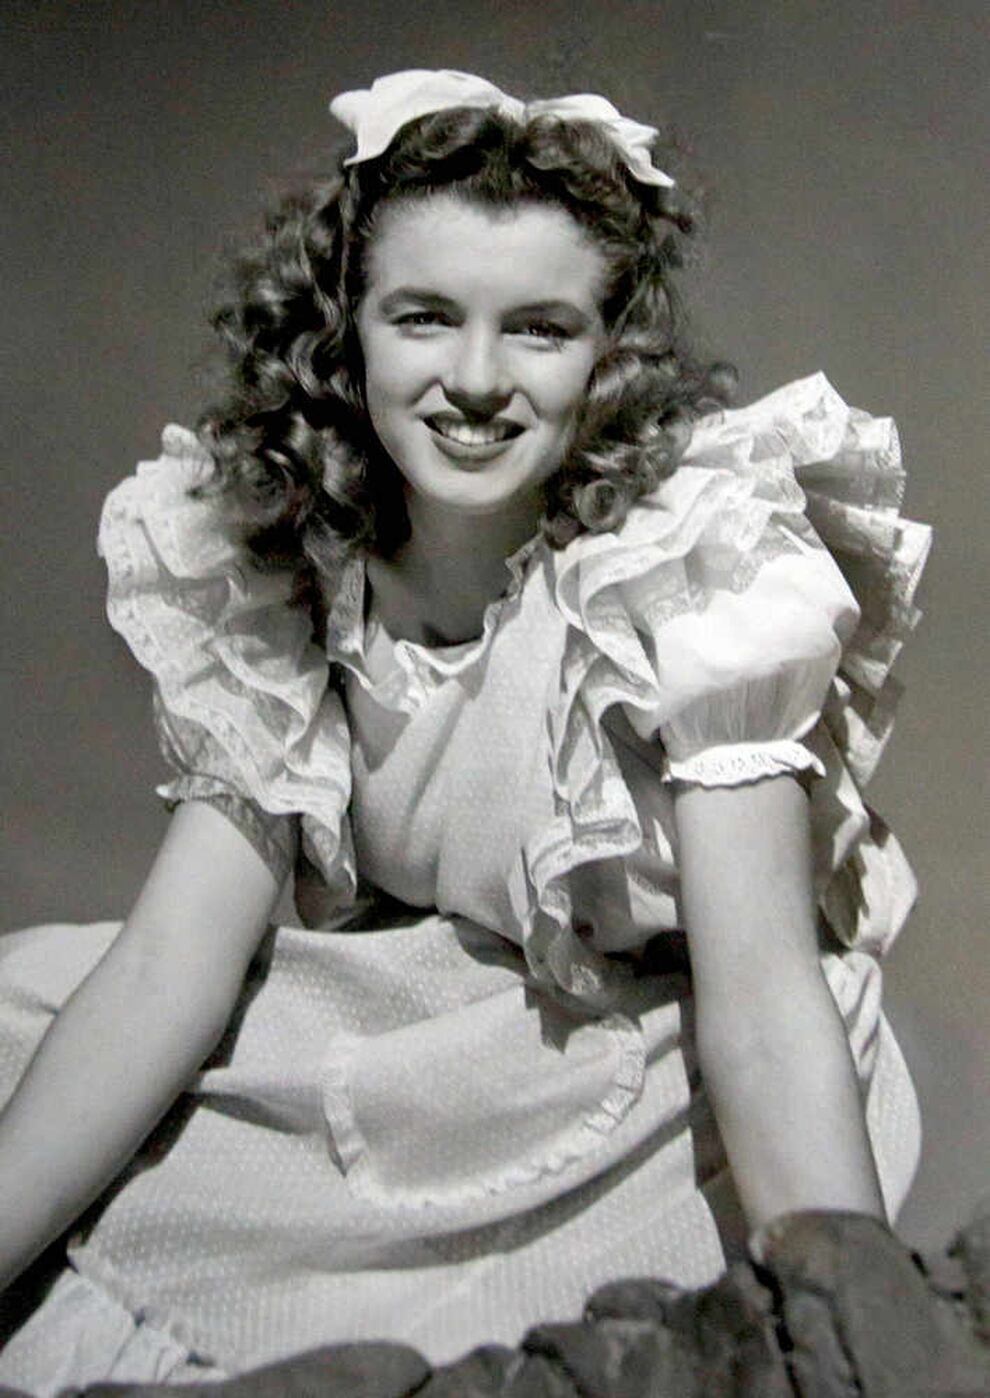 Rare photos of 20-year-old Marilyn Monroe before she was 